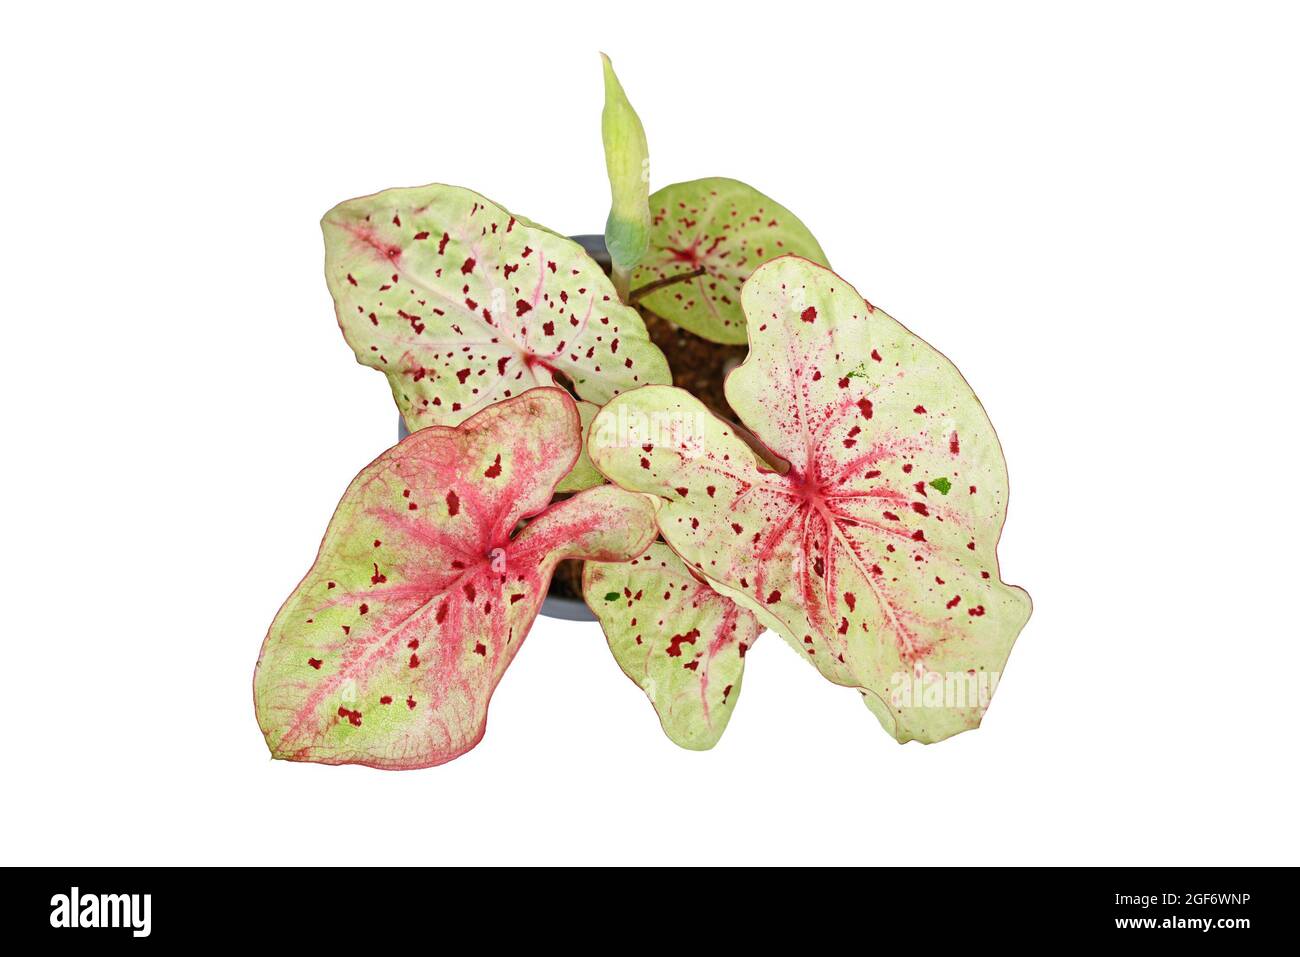 Top view of exotic 'Caladium Miss Muffet' houseplant with pink and ...